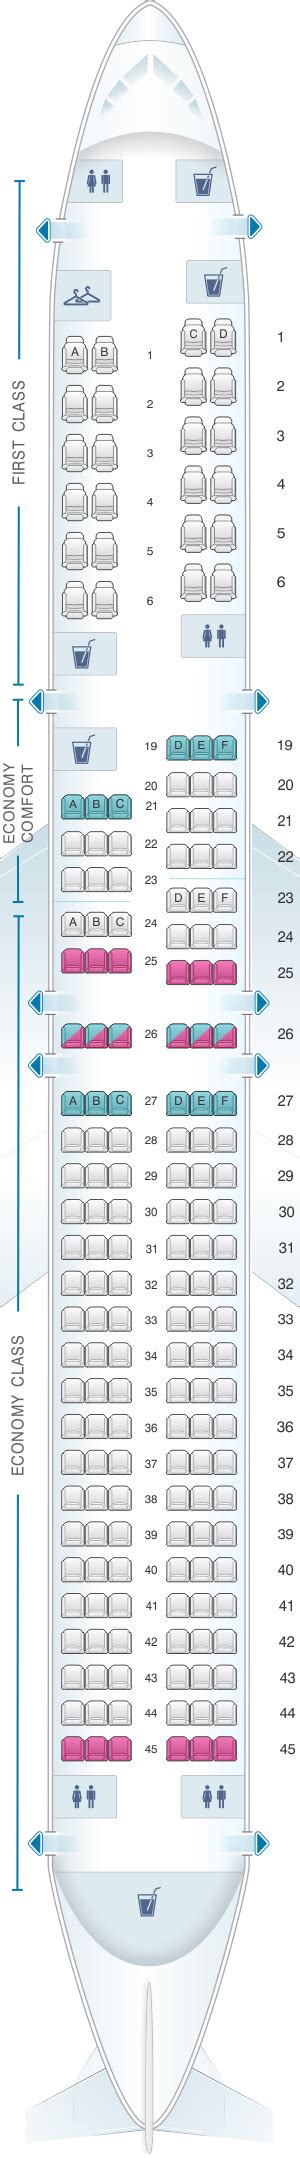 Boeing Delta Seating Chart Free Download Nude Photo Gallery